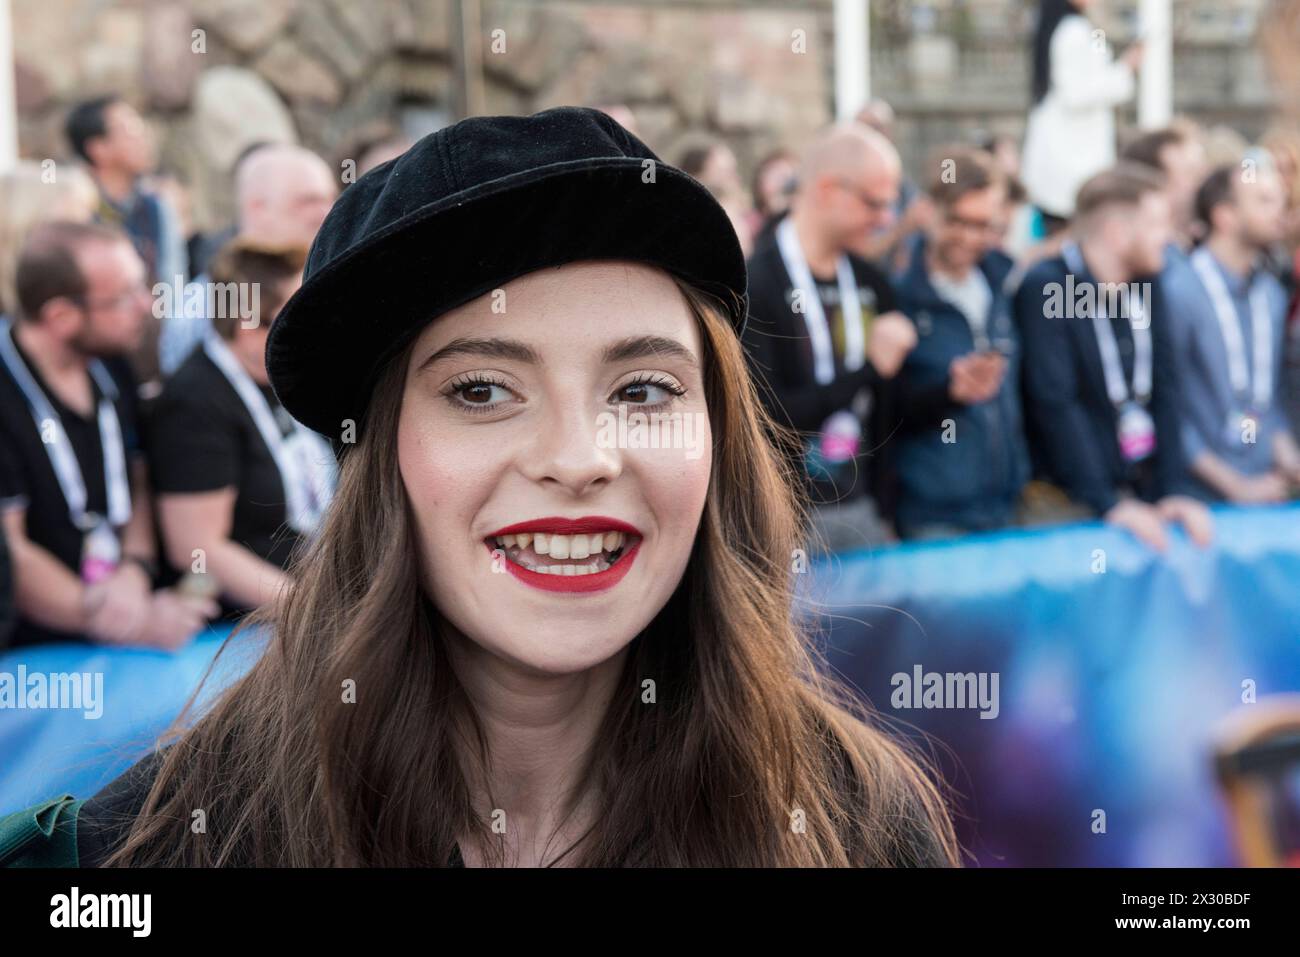 Eurovision Song Contest 2016, Stockholm, Sweden Stockholm, Sweden. 8 May. Francesca Michielin from Italy on the red carpet for the ESC 2016. Stockholm Euroclub Sweden *** Eurovision Song Contest 2016, Stockholm, Sweden Stockholm, Sweden 8 May Francesca Michielin from Italy on the red carpet for the ESC 2016 Stockholm Euroclub Sweden Stock Photo